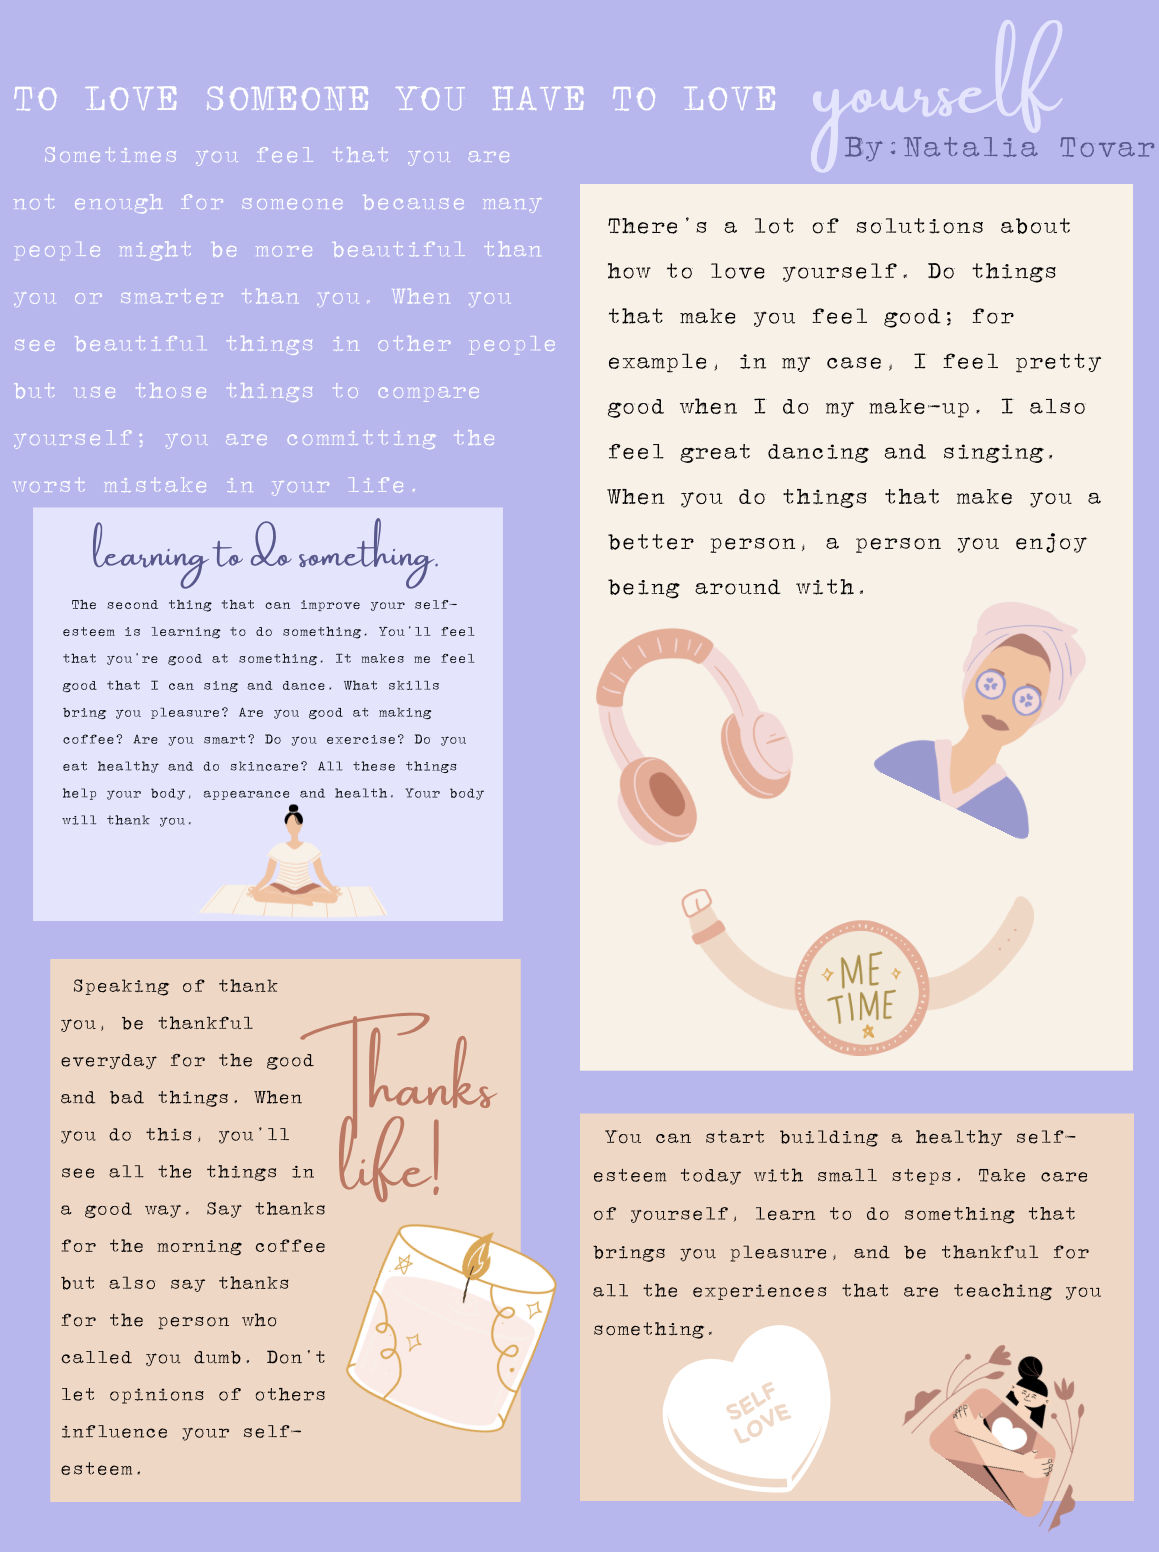 infographic gives self-care tips, including learning to do something and saying, "Thanks, life!"